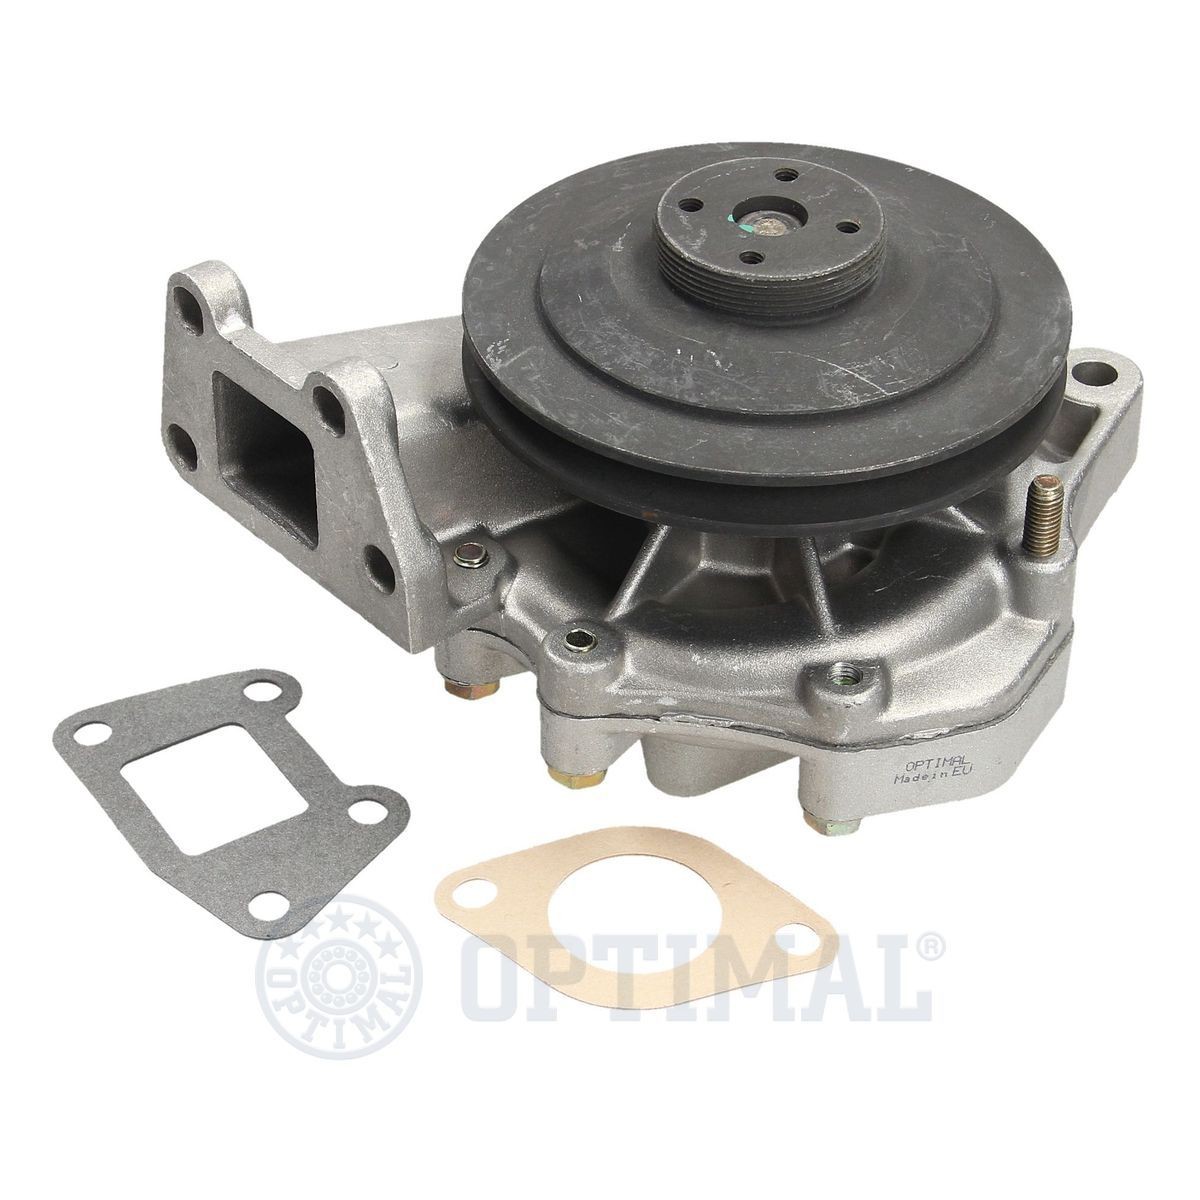 OPTIMAL with belt pulley, with gaskets/seals, Belt Pulley Ø: 131 mm, with housing Water pumps AQ-1624 buy